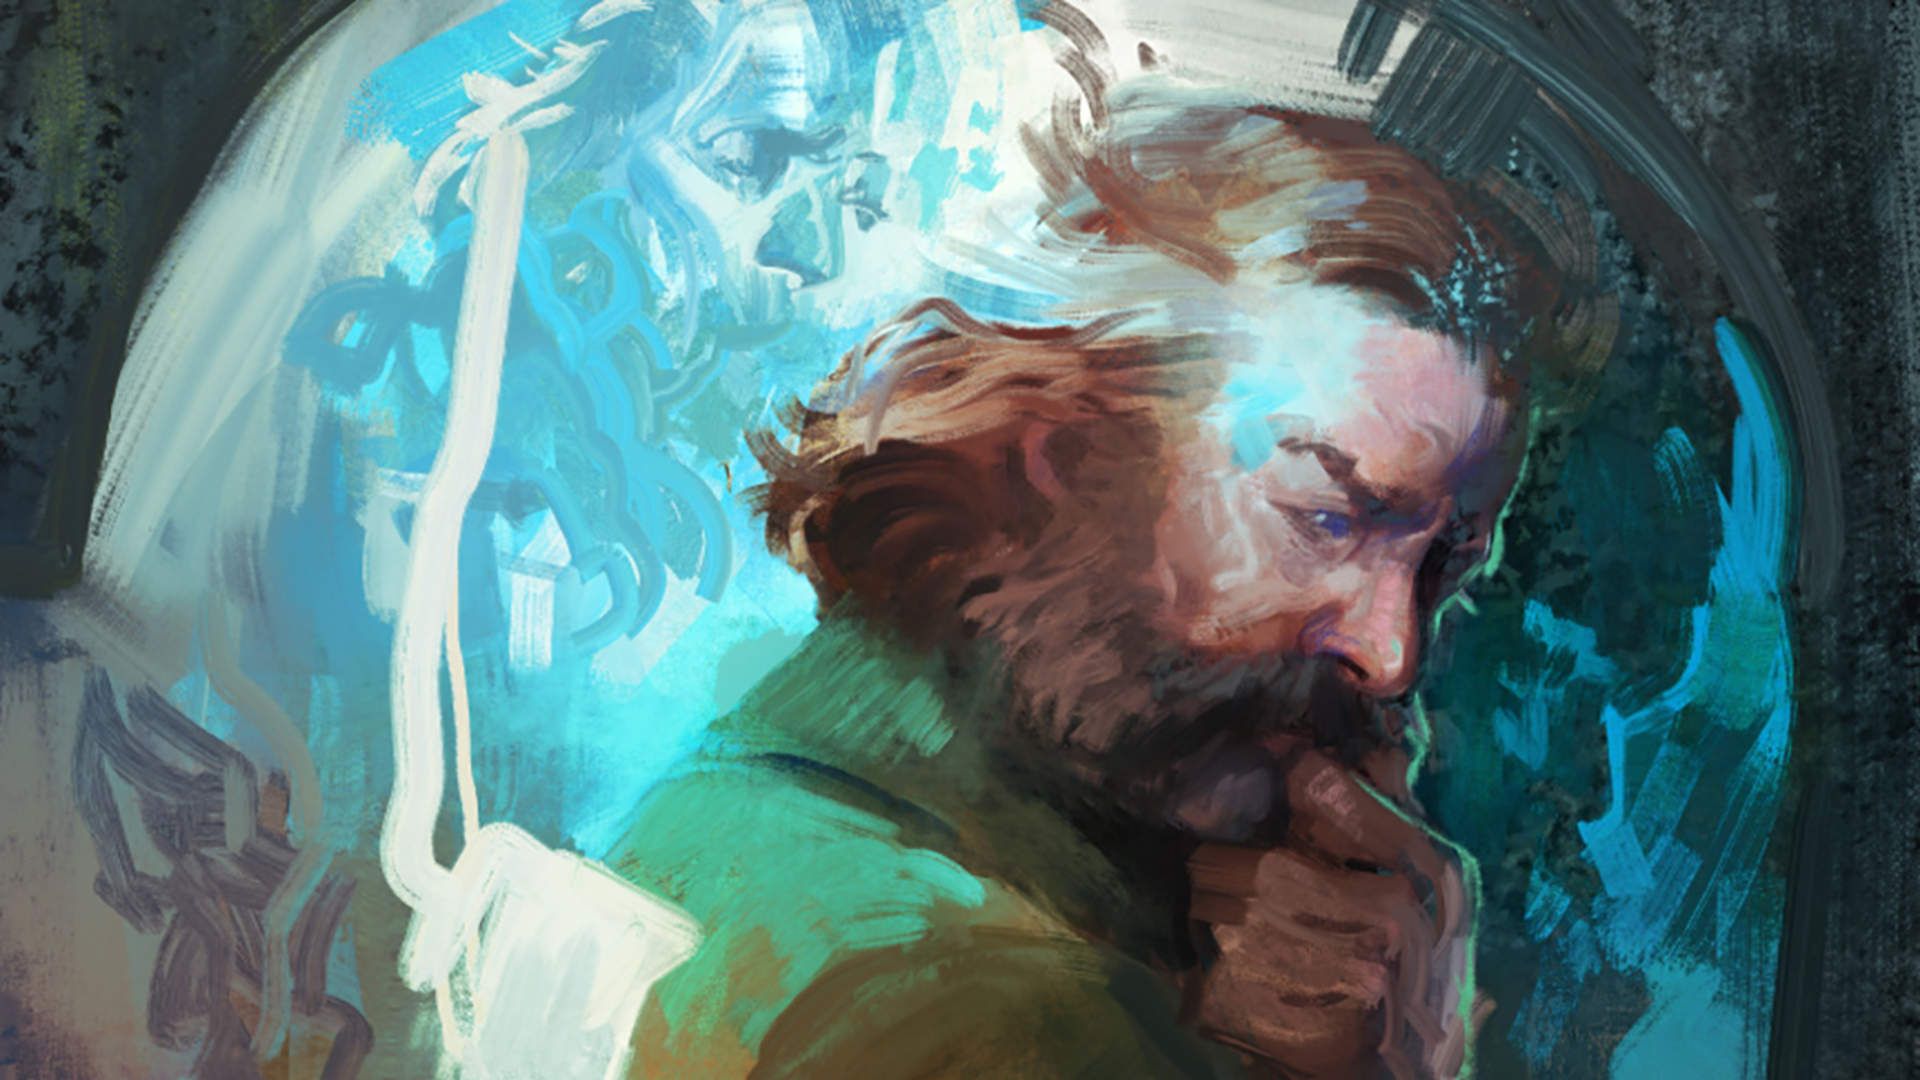 Disco Elysium Has Modding Now, So You Can Create Your Own Inner